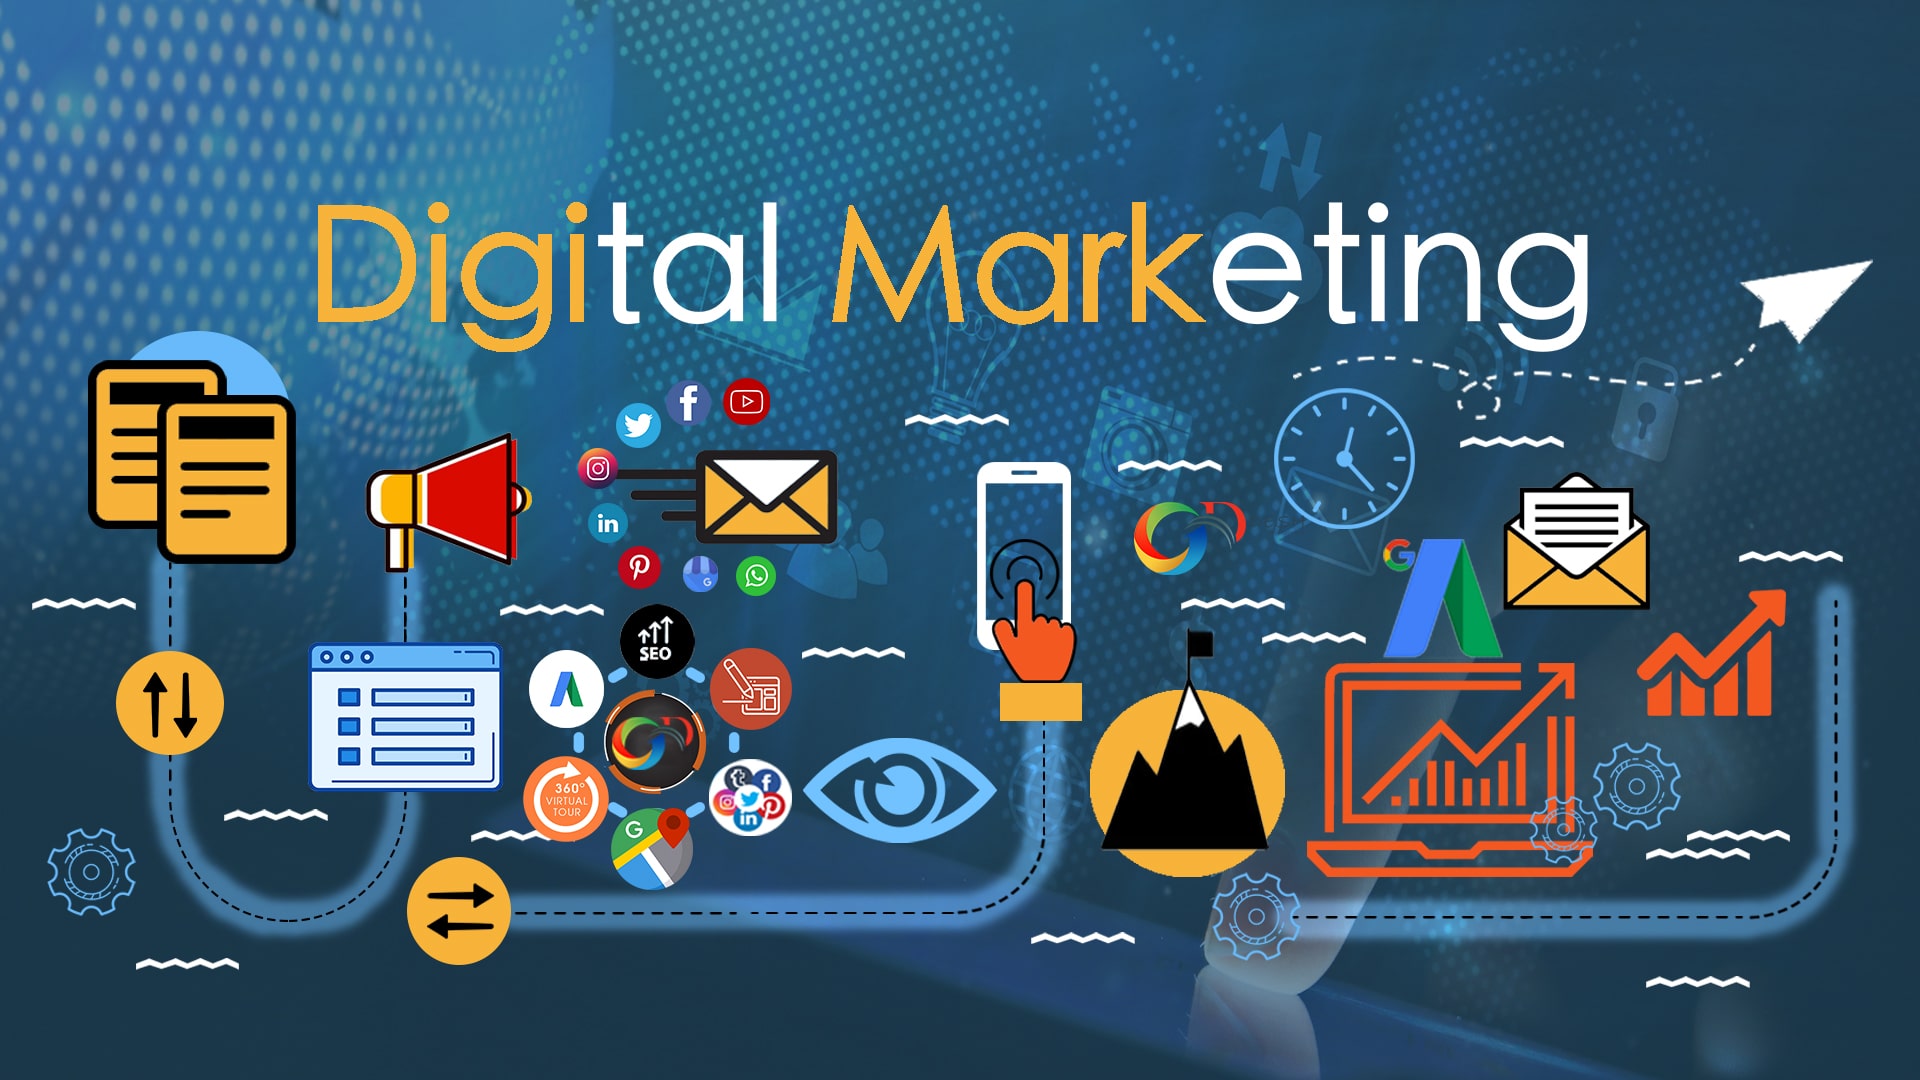 Differences between Digital Marketing & Traditional Marketing